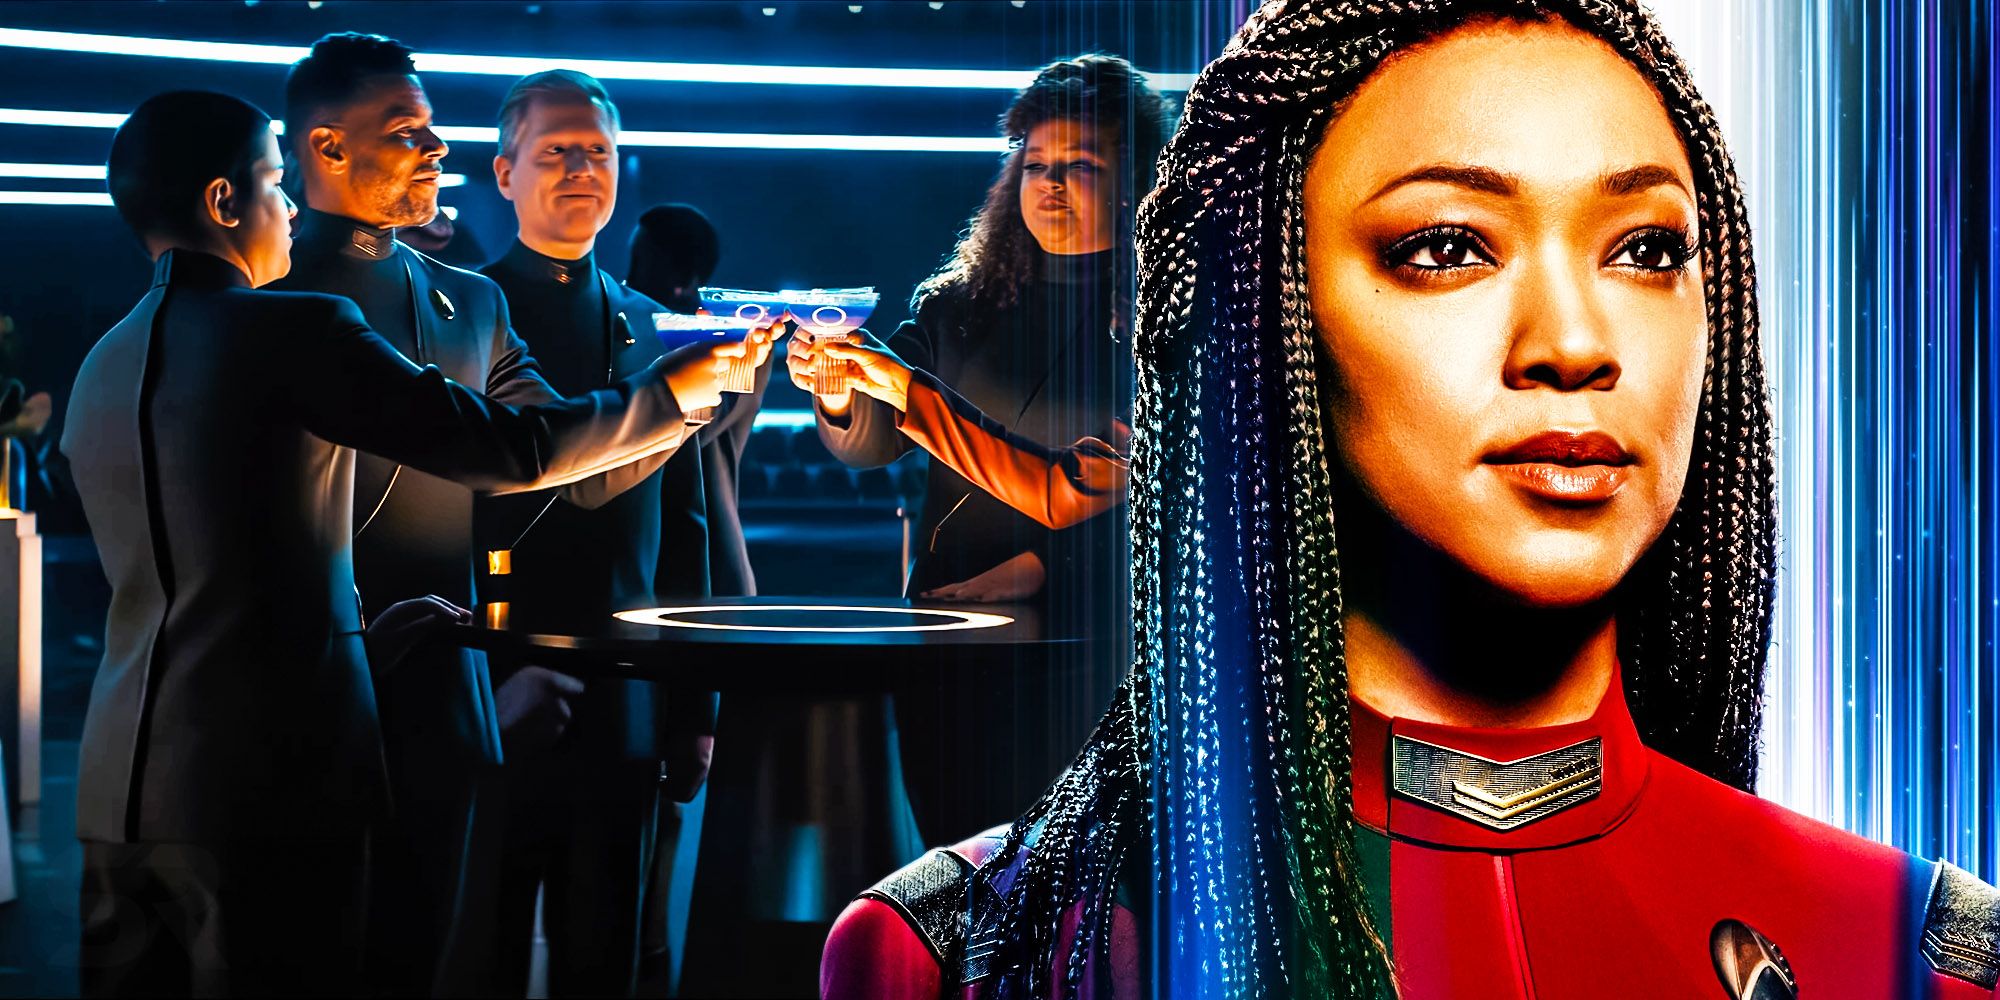 A hero shot of Captain Michael Burnham and the cast of Star Trek: Discovery sharing a toast behind her